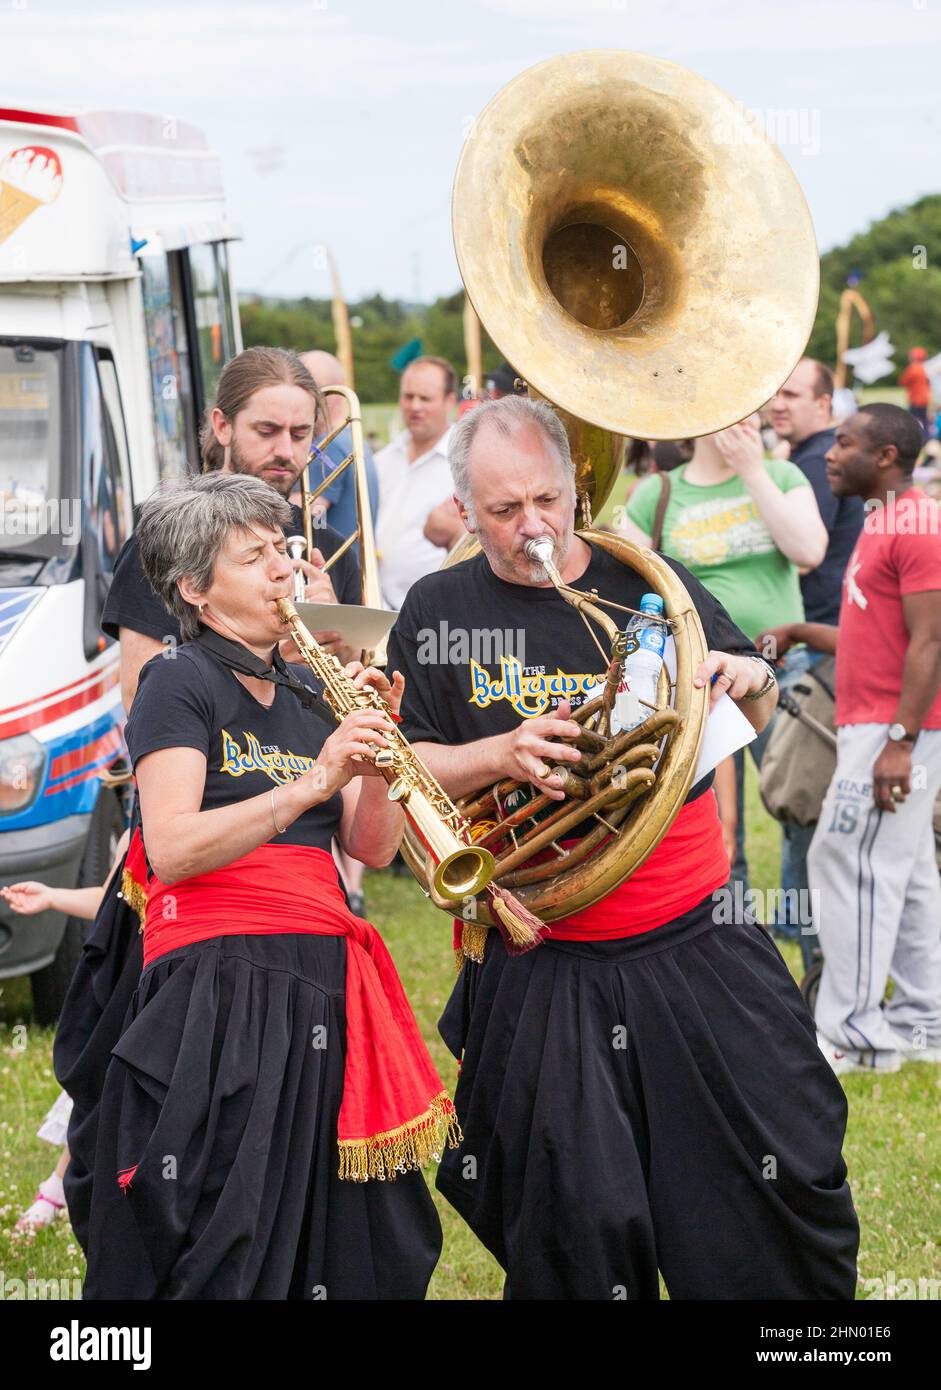 Musicians from Bollywood Brass Band play soprano saxophone and sousaphone at Washington Kite festival, north east  England, 2010 Stock Photo